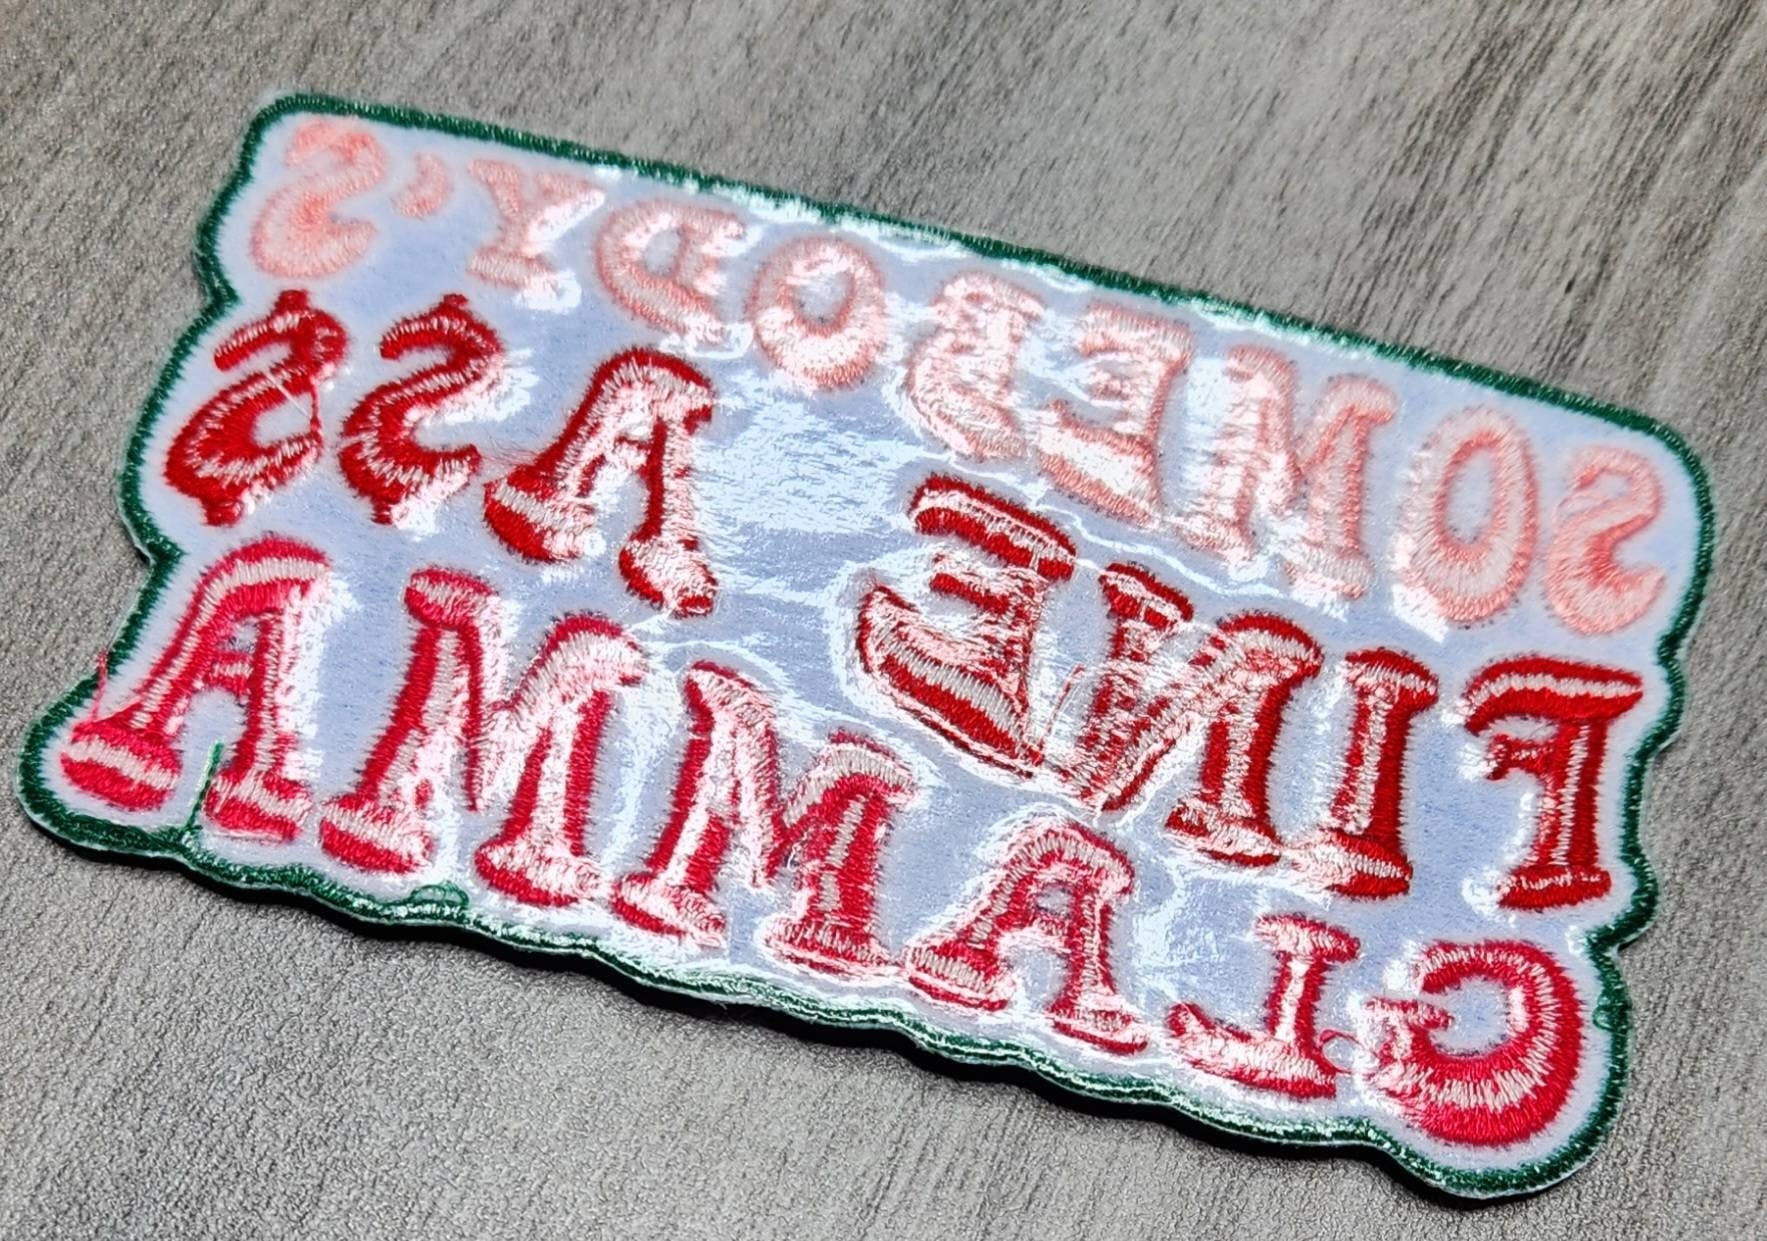 New, 1-pc, Colorful "Somebody's Fine Ass GLAMMA" Iron-on Embroidered Patch, Cute Patch for Jackets, Hats, Crocs, Funny Gifts